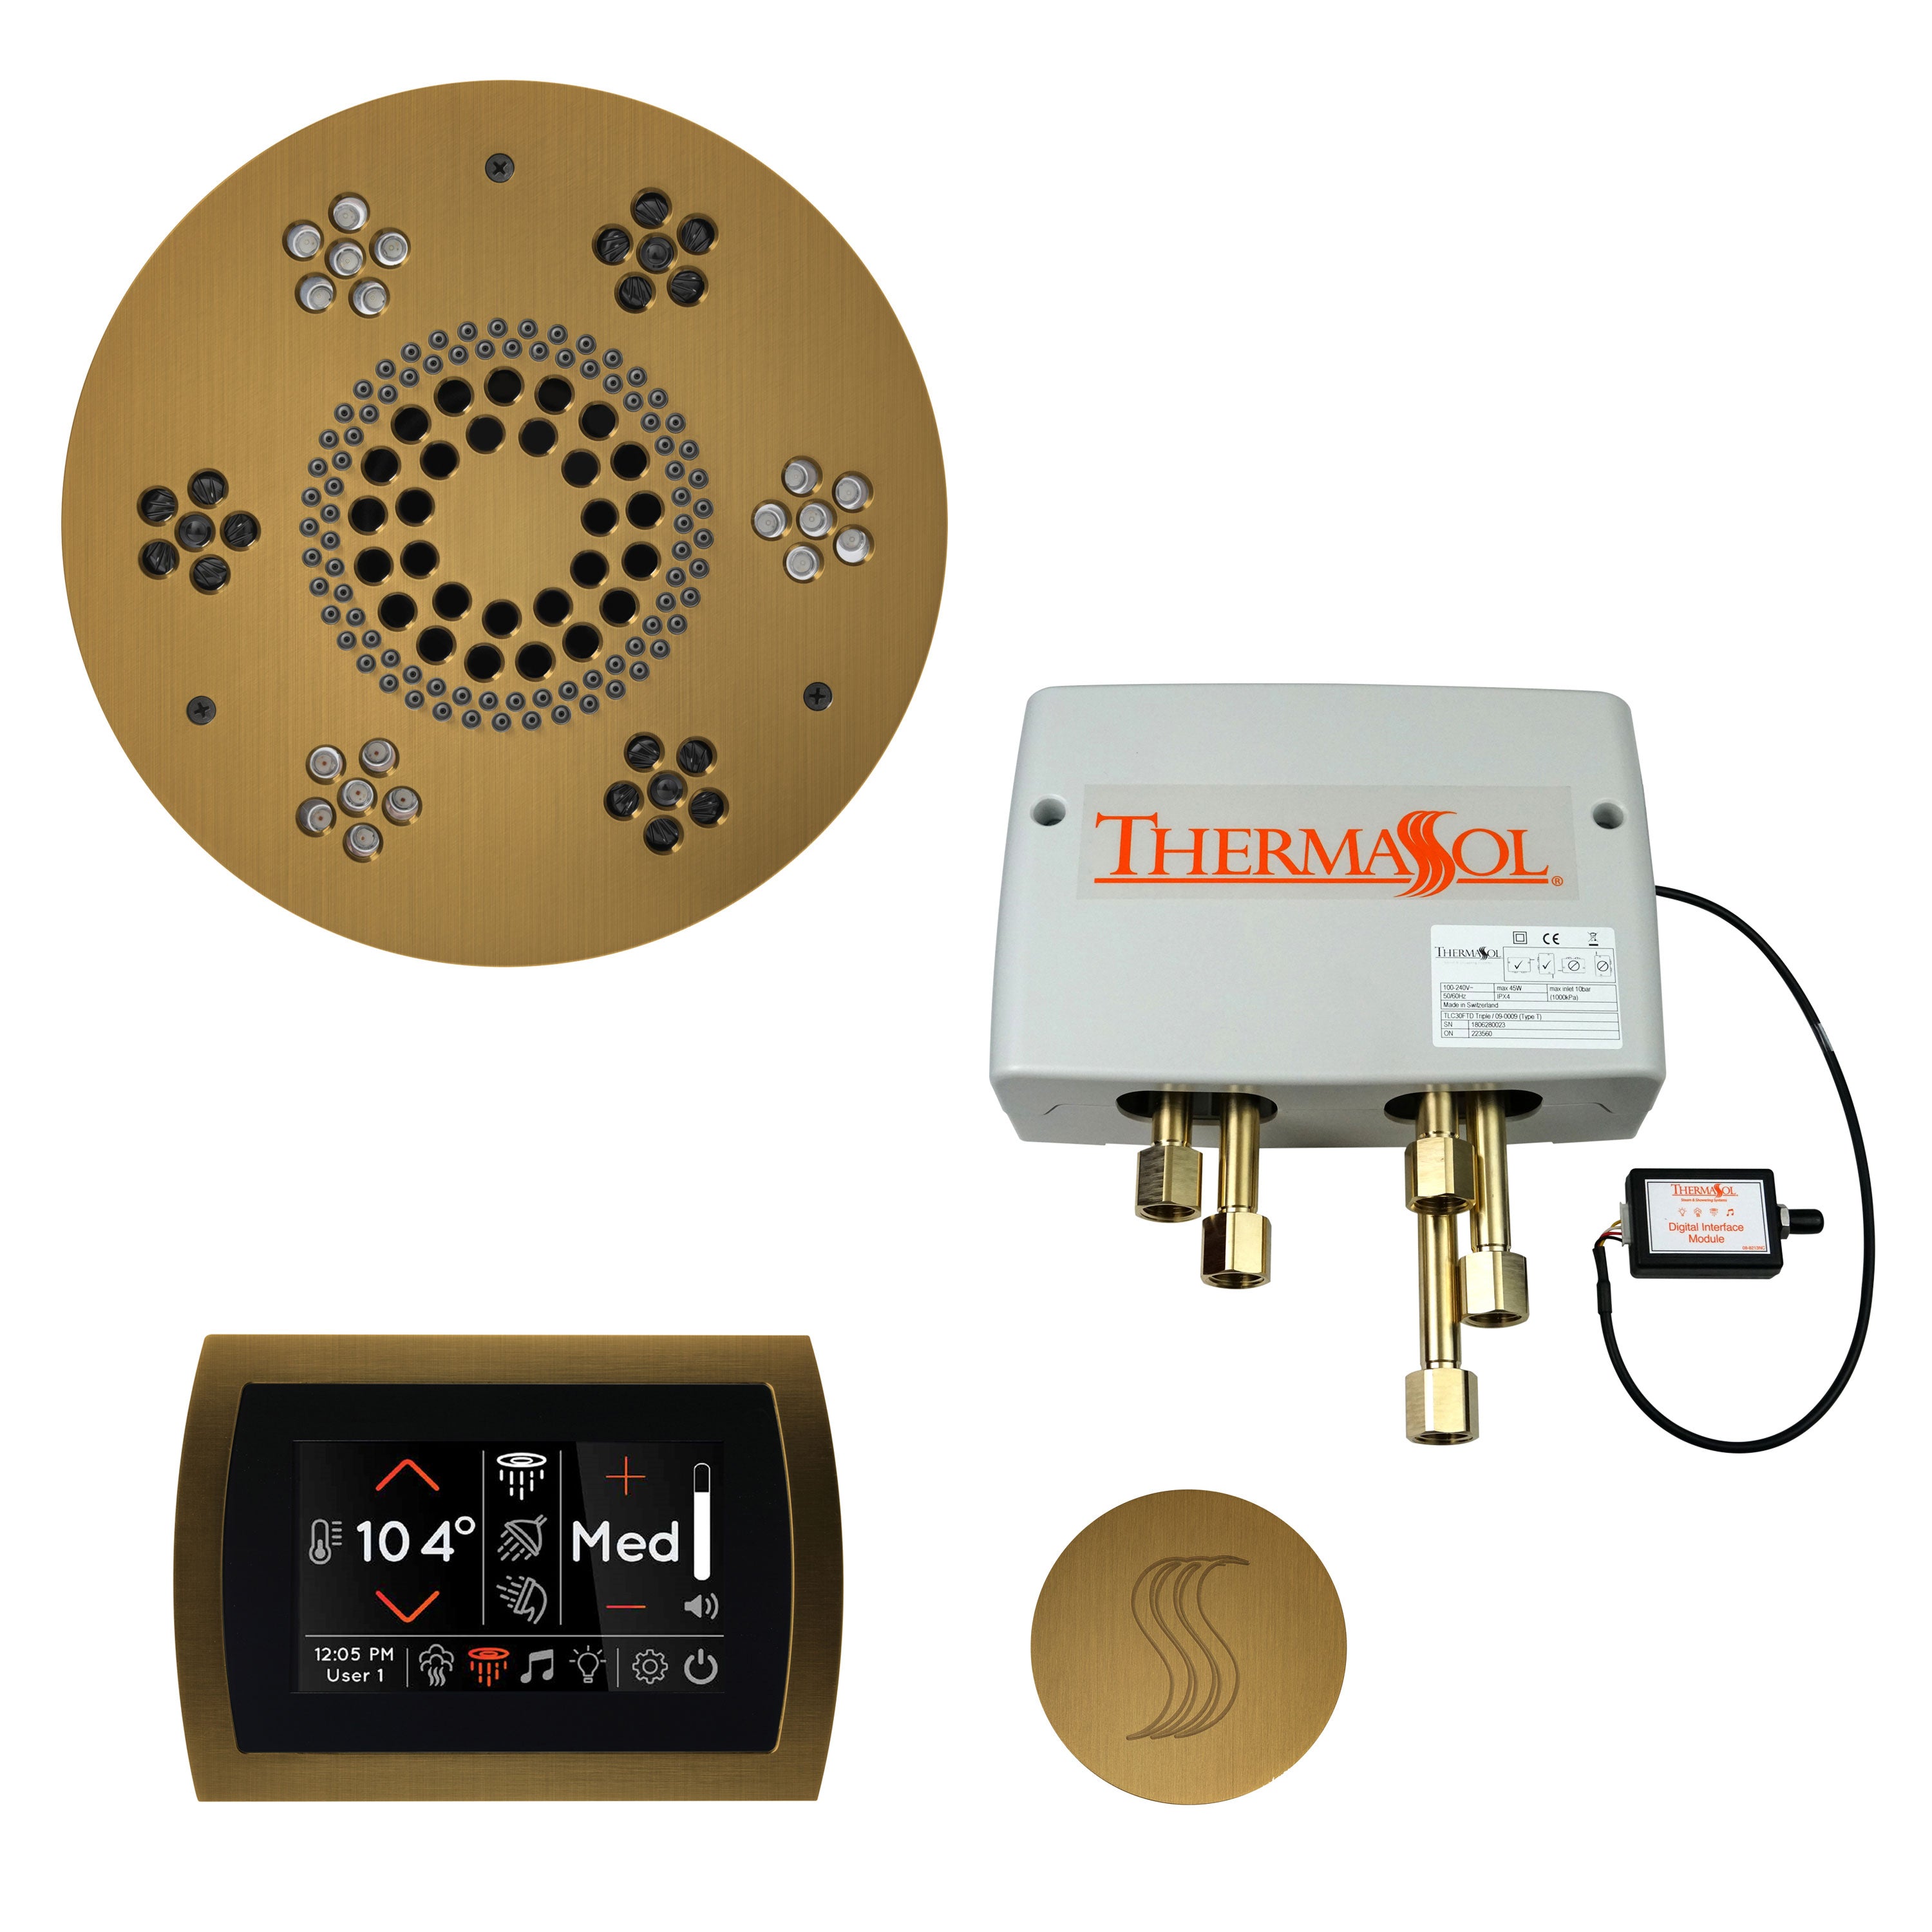 ThermaSol Steam Shower Kit - The Total Wellness Package with SignaTouch